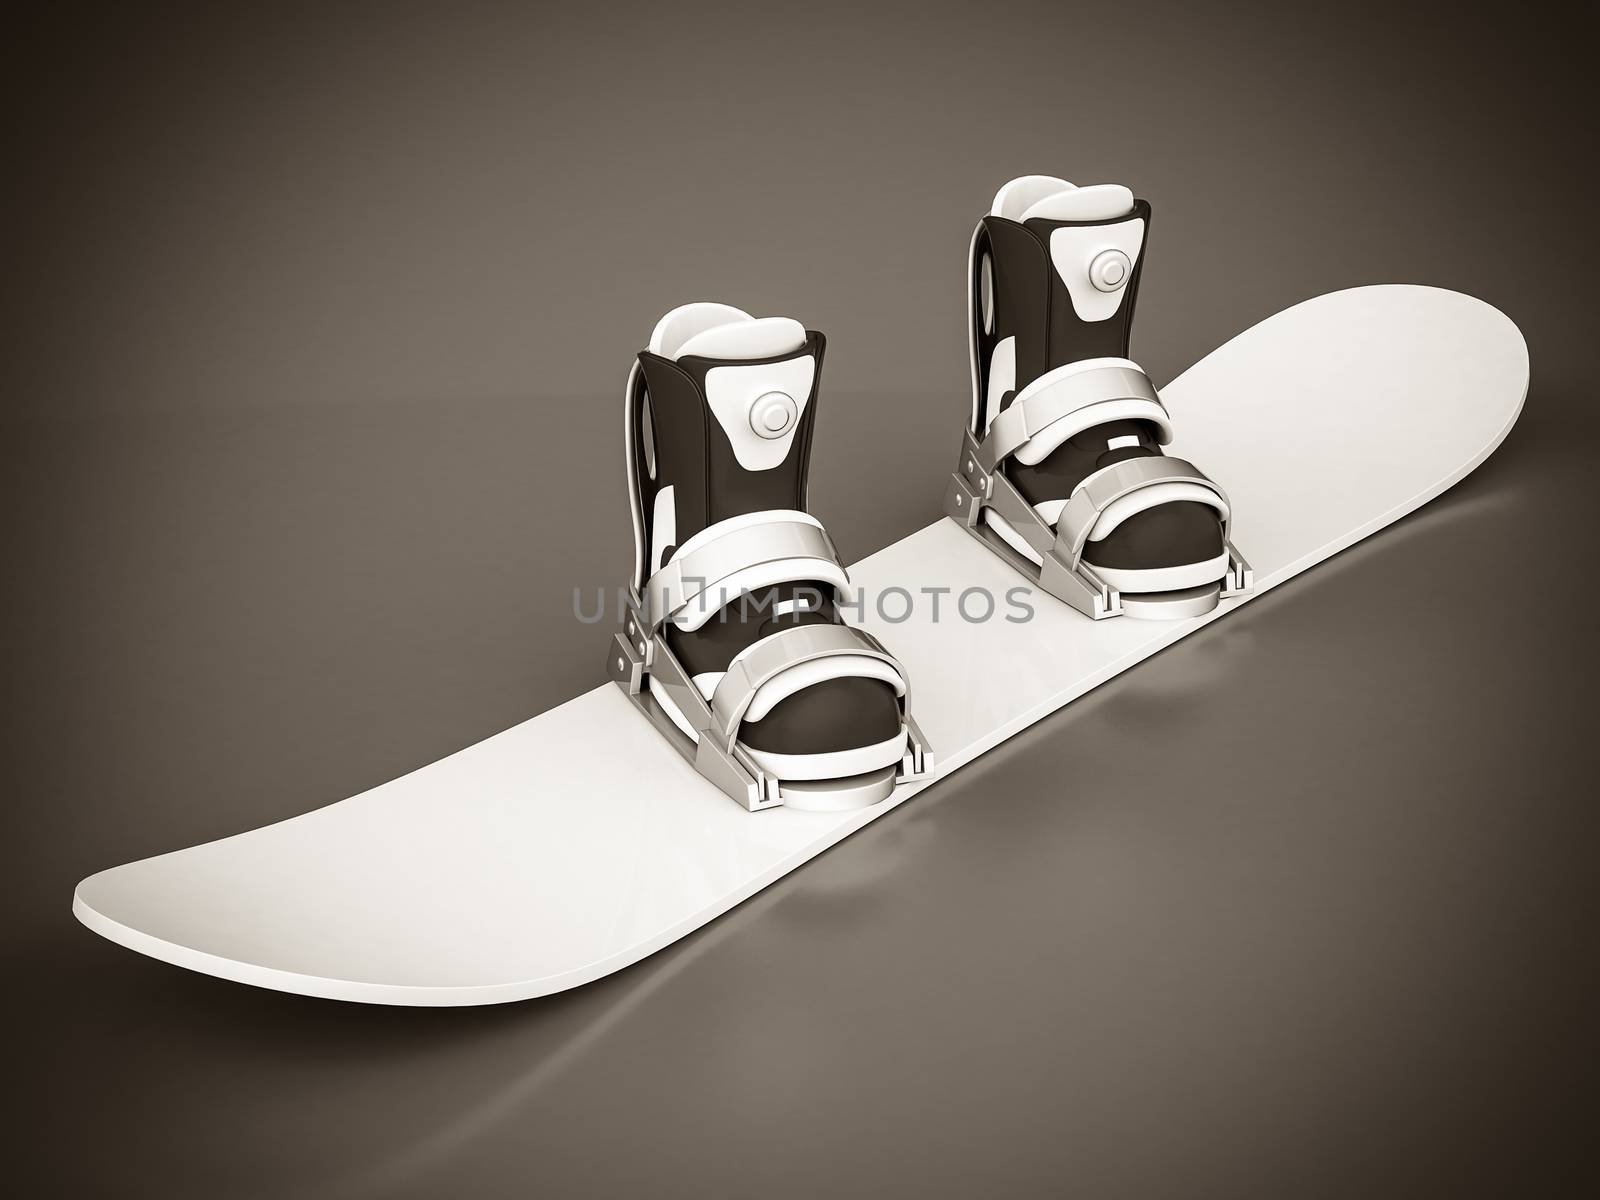 sbeautiful snowboard on a gray background. black and white